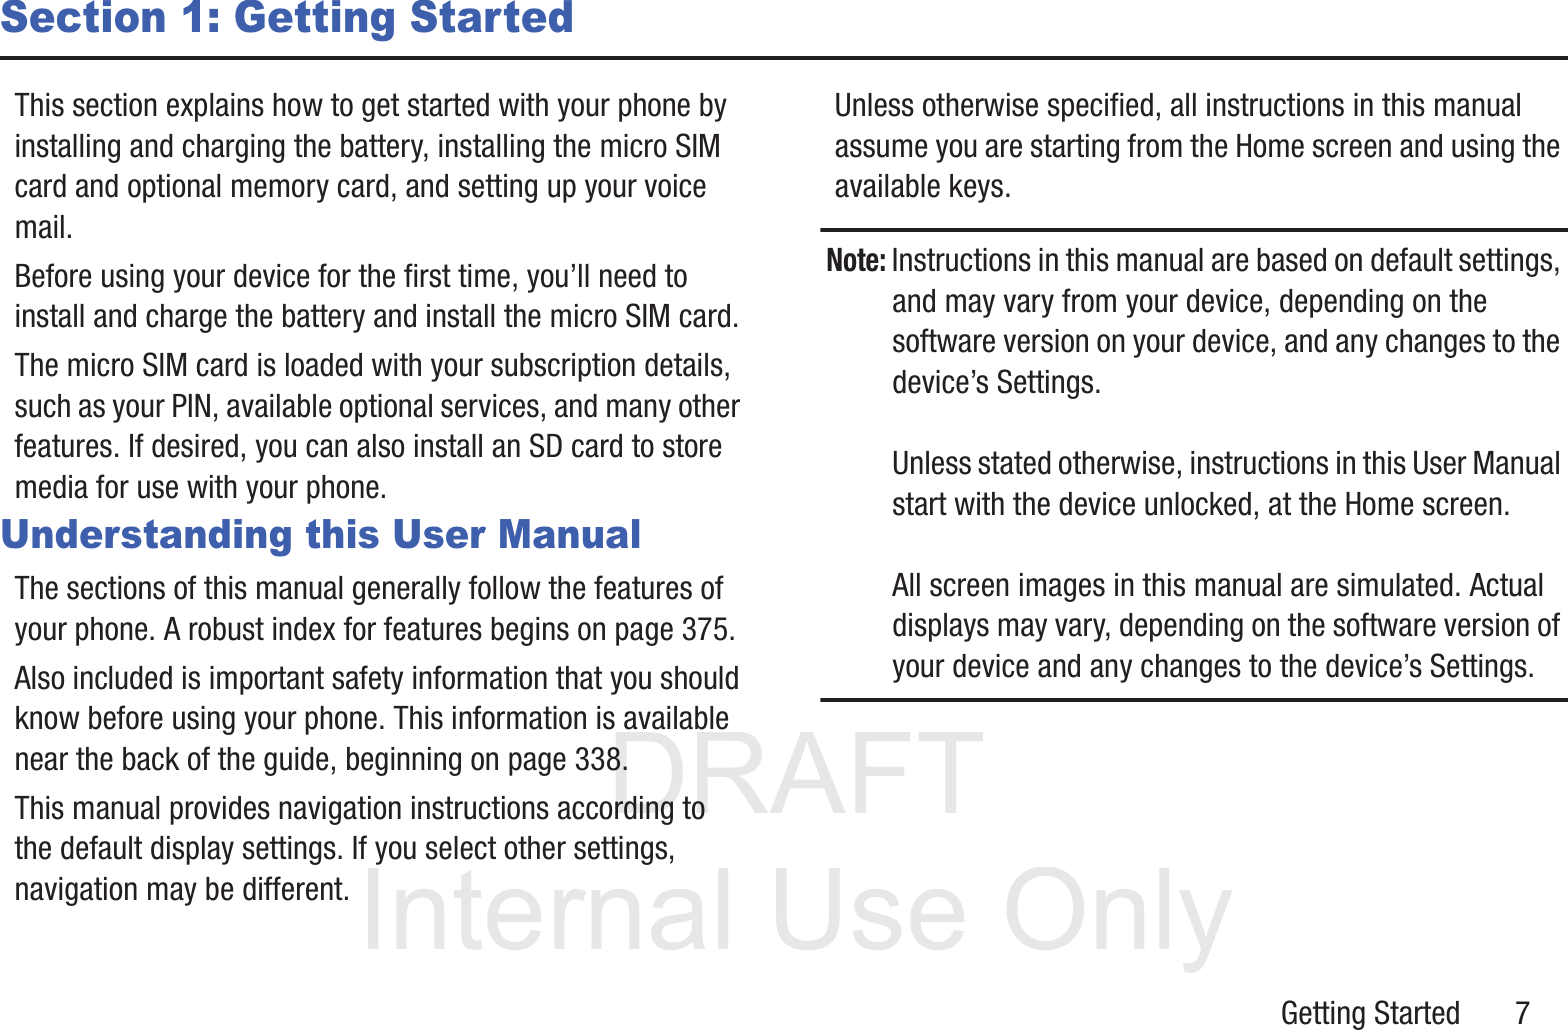 DRAFT InternalUse OnlyGetting Started       7Section 1: Getting StartedThis section explains how to get started with your phone by installing and charging the battery, installing the micro SIM card and optional memory card, and setting up your voice mail.Before using your device for the first time, you’ll need to install and charge the battery and install the micro SIM card. The micro SIM card is loaded with your subscription details, such as your PIN, available optional services, and many other features. If desired, you can also install an SD card to store media for use with your phone.Understanding this User ManualThe sections of this manual generally follow the features of your phone. A robust index for features begins on page 375.Also included is important safety information that you should know before using your phone. This information is available near the back of the guide, beginning on page 338.This manual provides navigation instructions according to the default display settings. If you select other settings, navigation may be different.Unless otherwise specified, all instructions in this manual assume you are starting from the Home screen and using the available keys. Note: Instructions in this manual are based on default settings, and may vary from your device, depending on the software version on your device, and any changes to the device’s Settings.Unless stated otherwise, instructions in this User Manual start with the device unlocked, at the Home screen.All screen images in this manual are simulated. Actual displays may vary, depending on the software version of your device and any changes to the device’s Settings.